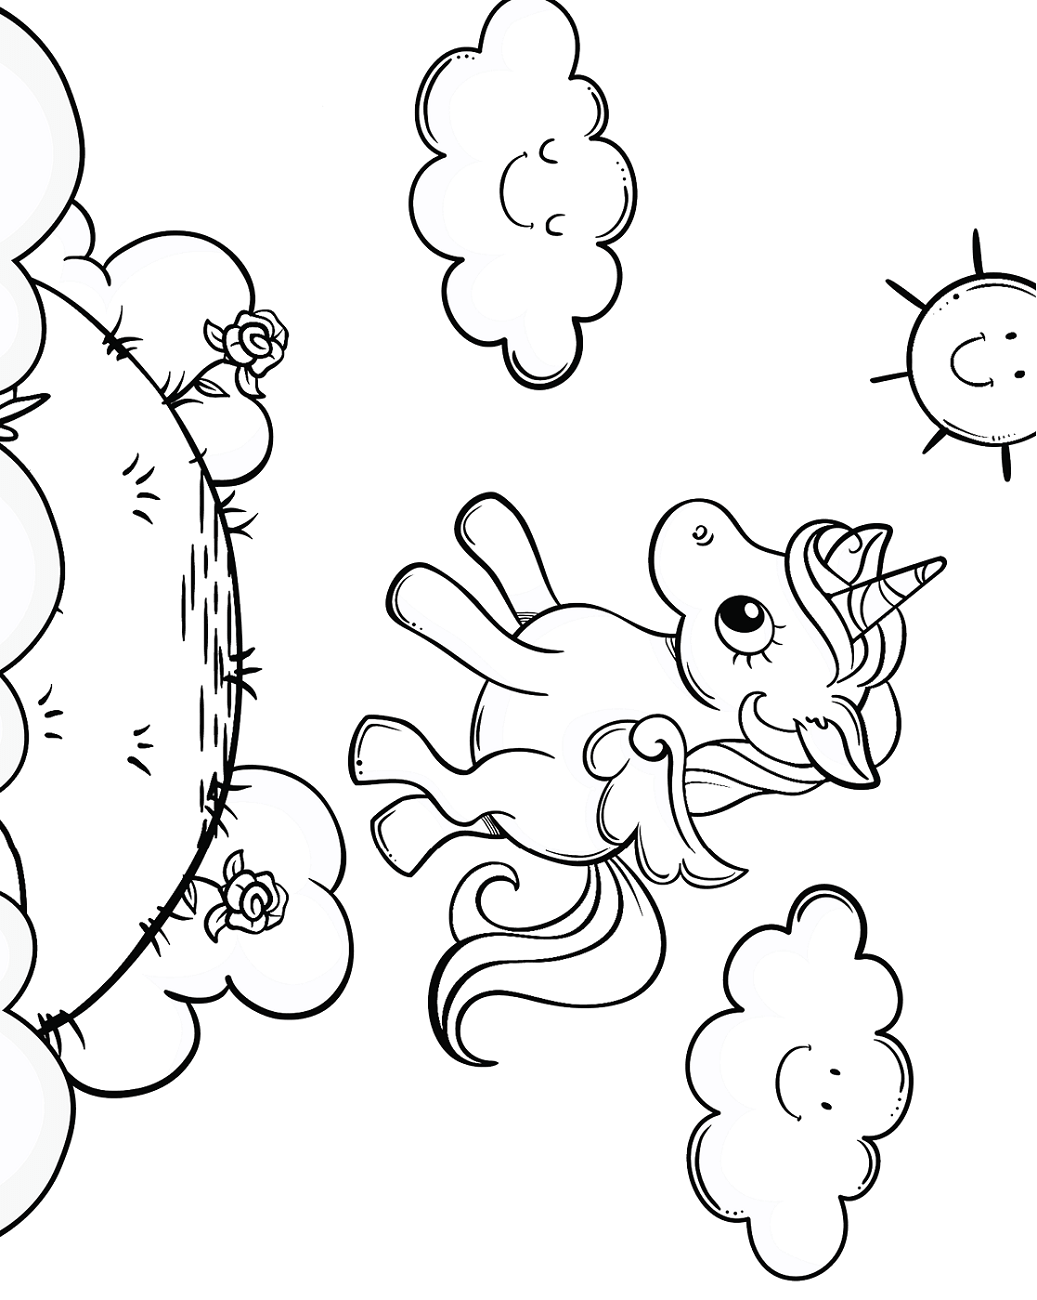 Baby Unicorn In Magical Sky Coloring Page - Free Printable Coloring